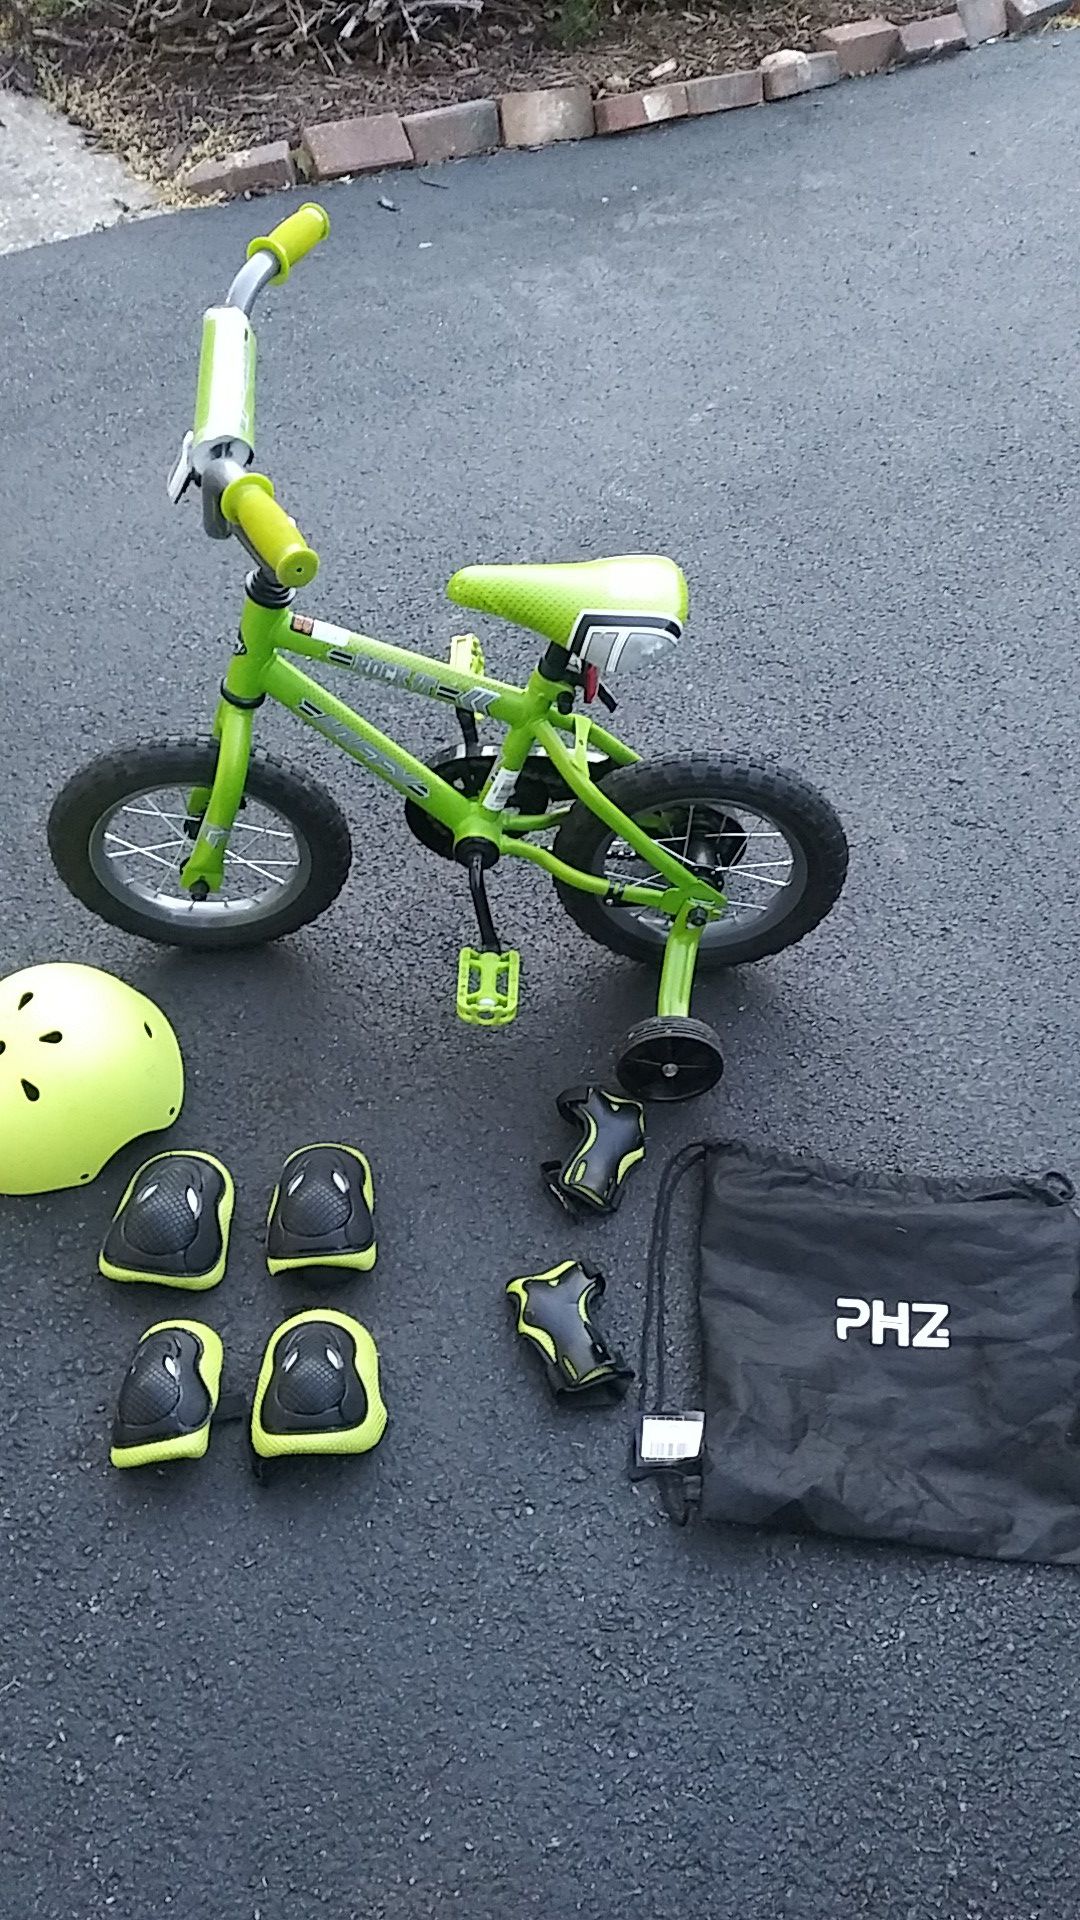 Youth 12 inch Bicycle and Safety Gear